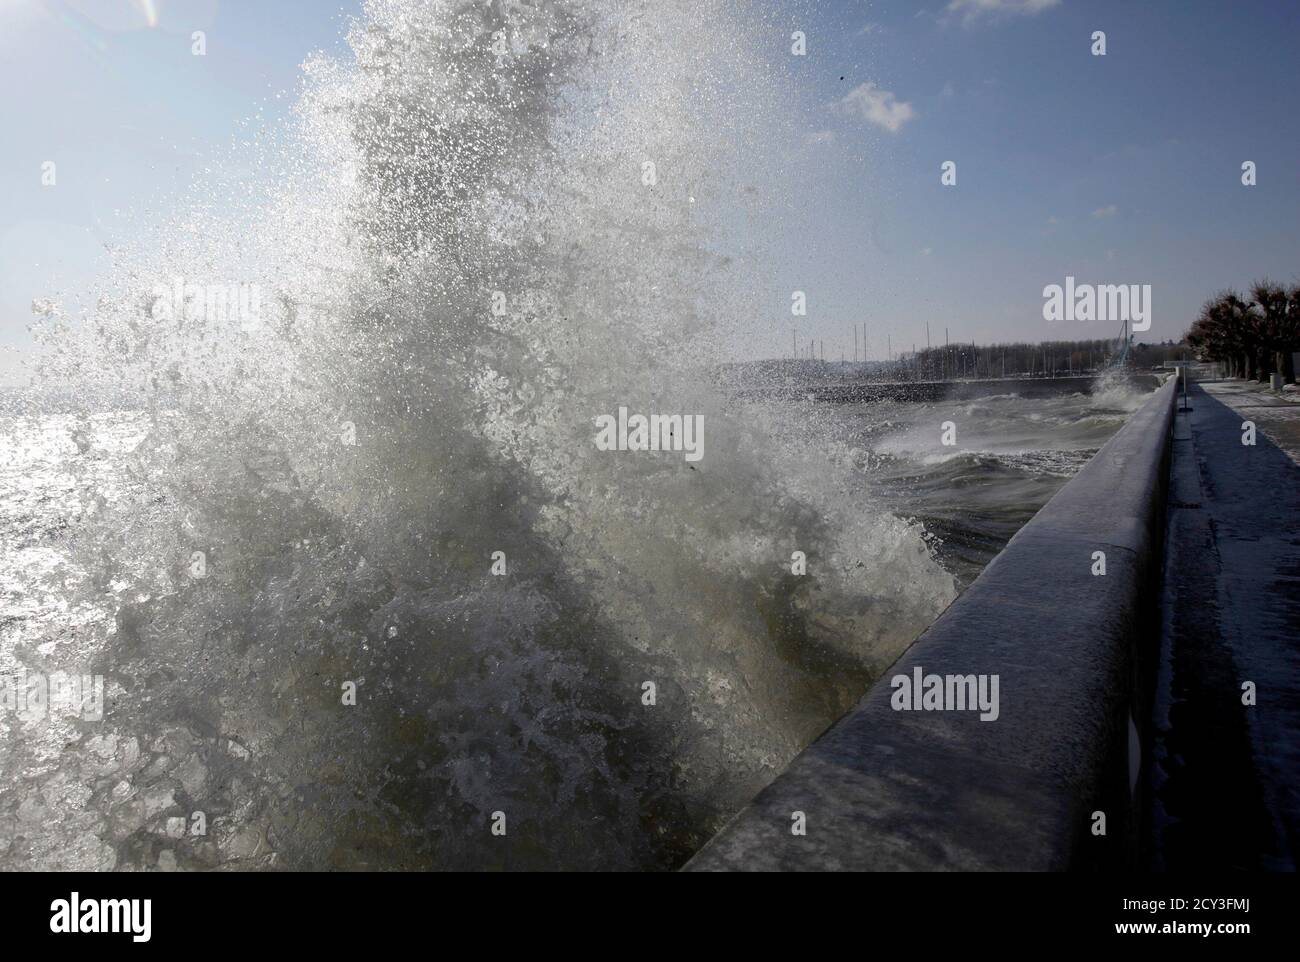 A wave splashes onto a wall on a windy winter day in Grandson, near Yverdon  February 4, 2012. Temperatures dropped to as low as minus 11 degrees  Celsius (12.2 degrees Fahrenheit) in